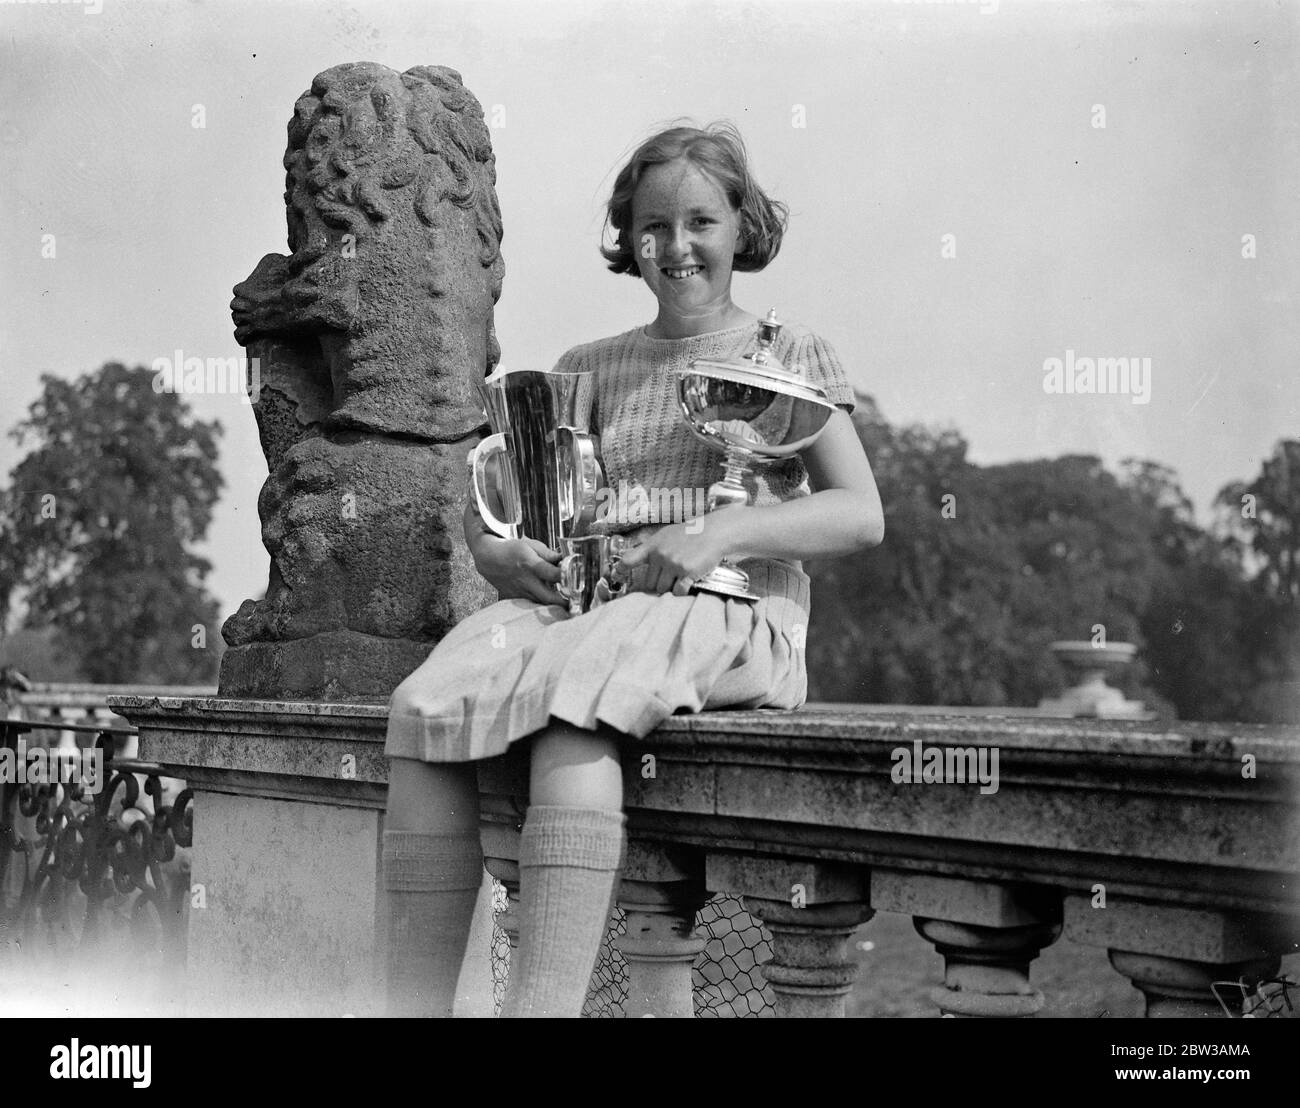 13 year old girl wins golf championships . Little Nancy Jupp 13 year old wonder girl golfer champion holding her cups . 14 September 1934 Stock Photo